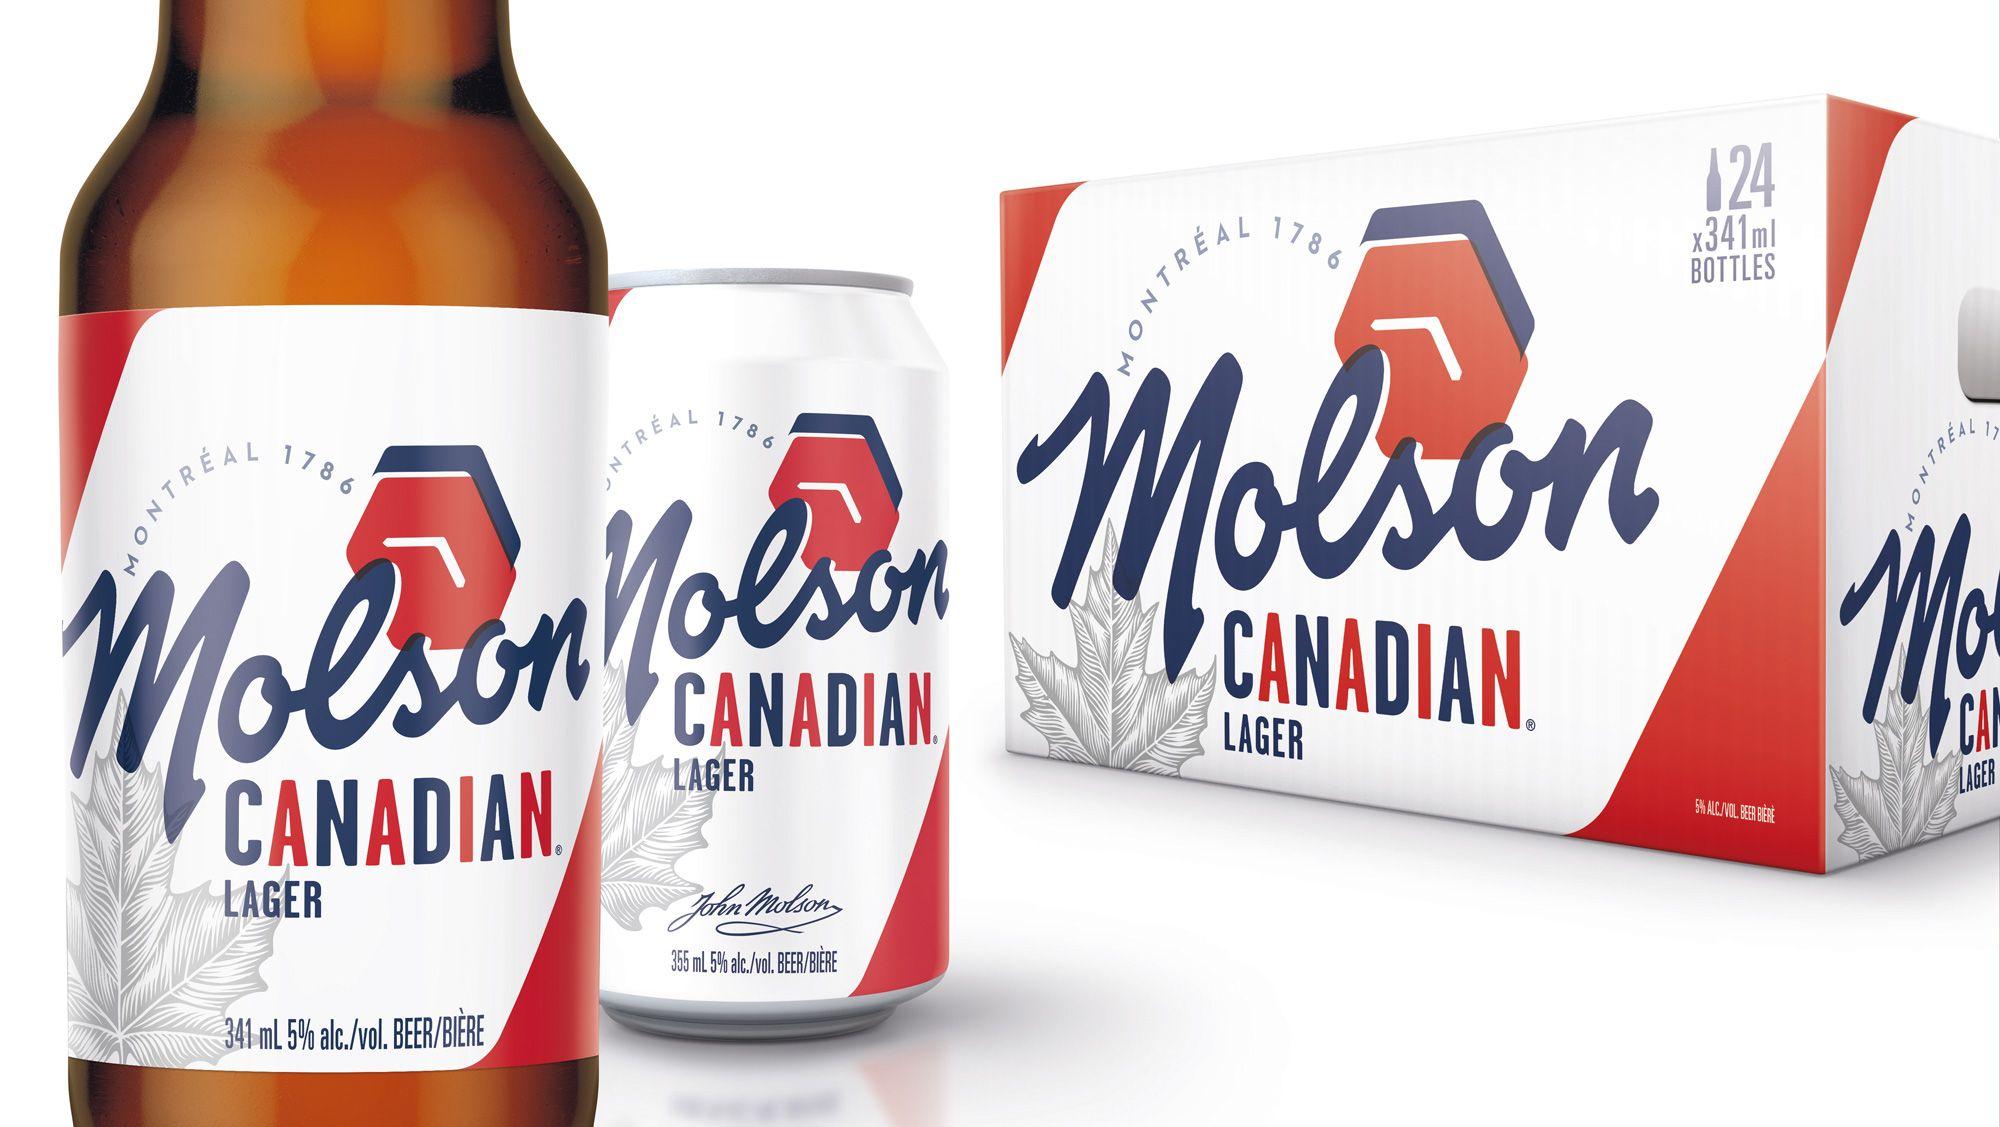 Molson Canadian Logo - Brand New: New Logo and Packaging for Molson Brands by BrandOpus